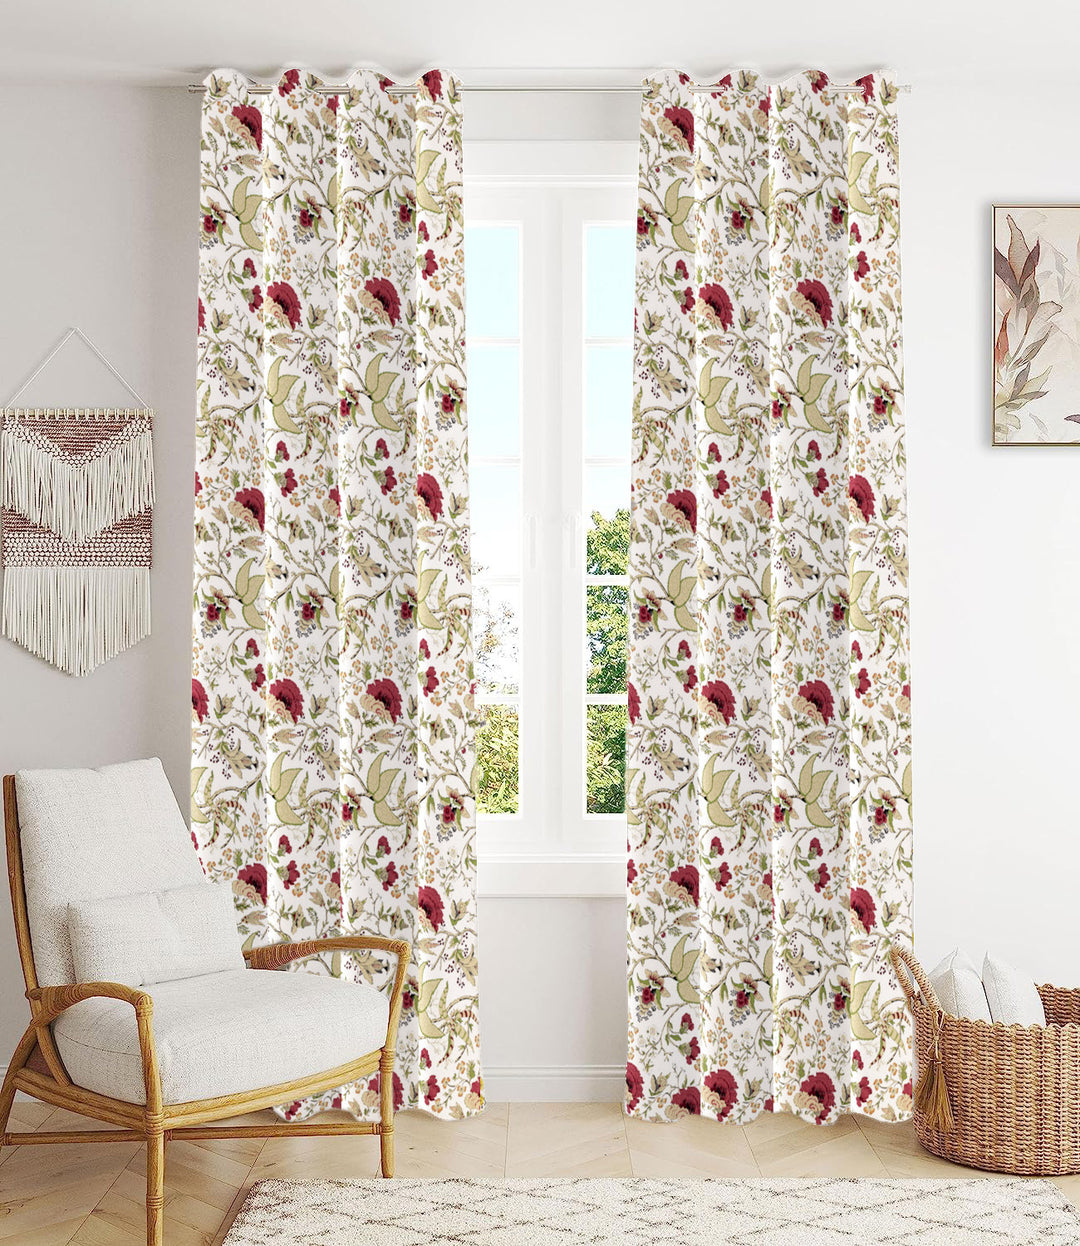 Duck Cotton Jaipuri Printed Curtains (Pack of 2 & 100% Cotton)